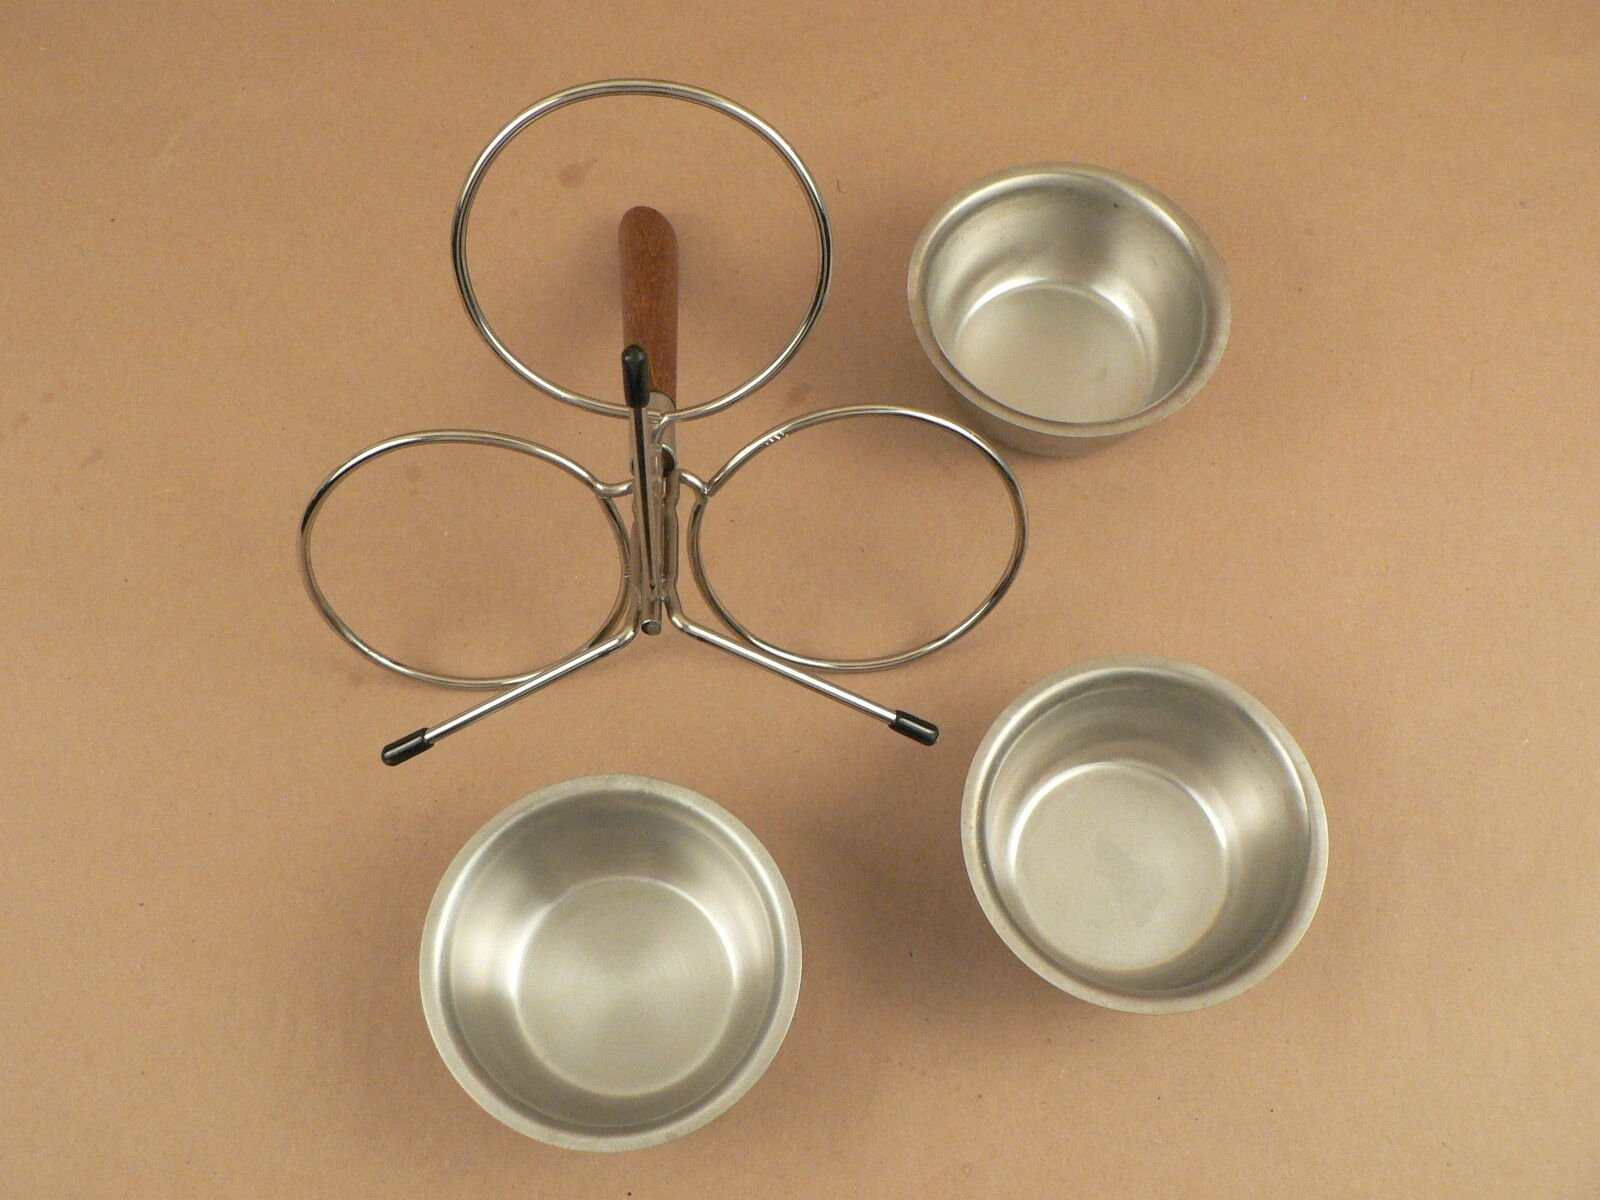 A Swedish modern retro condiment servers, 3 cups each, wood handle stand